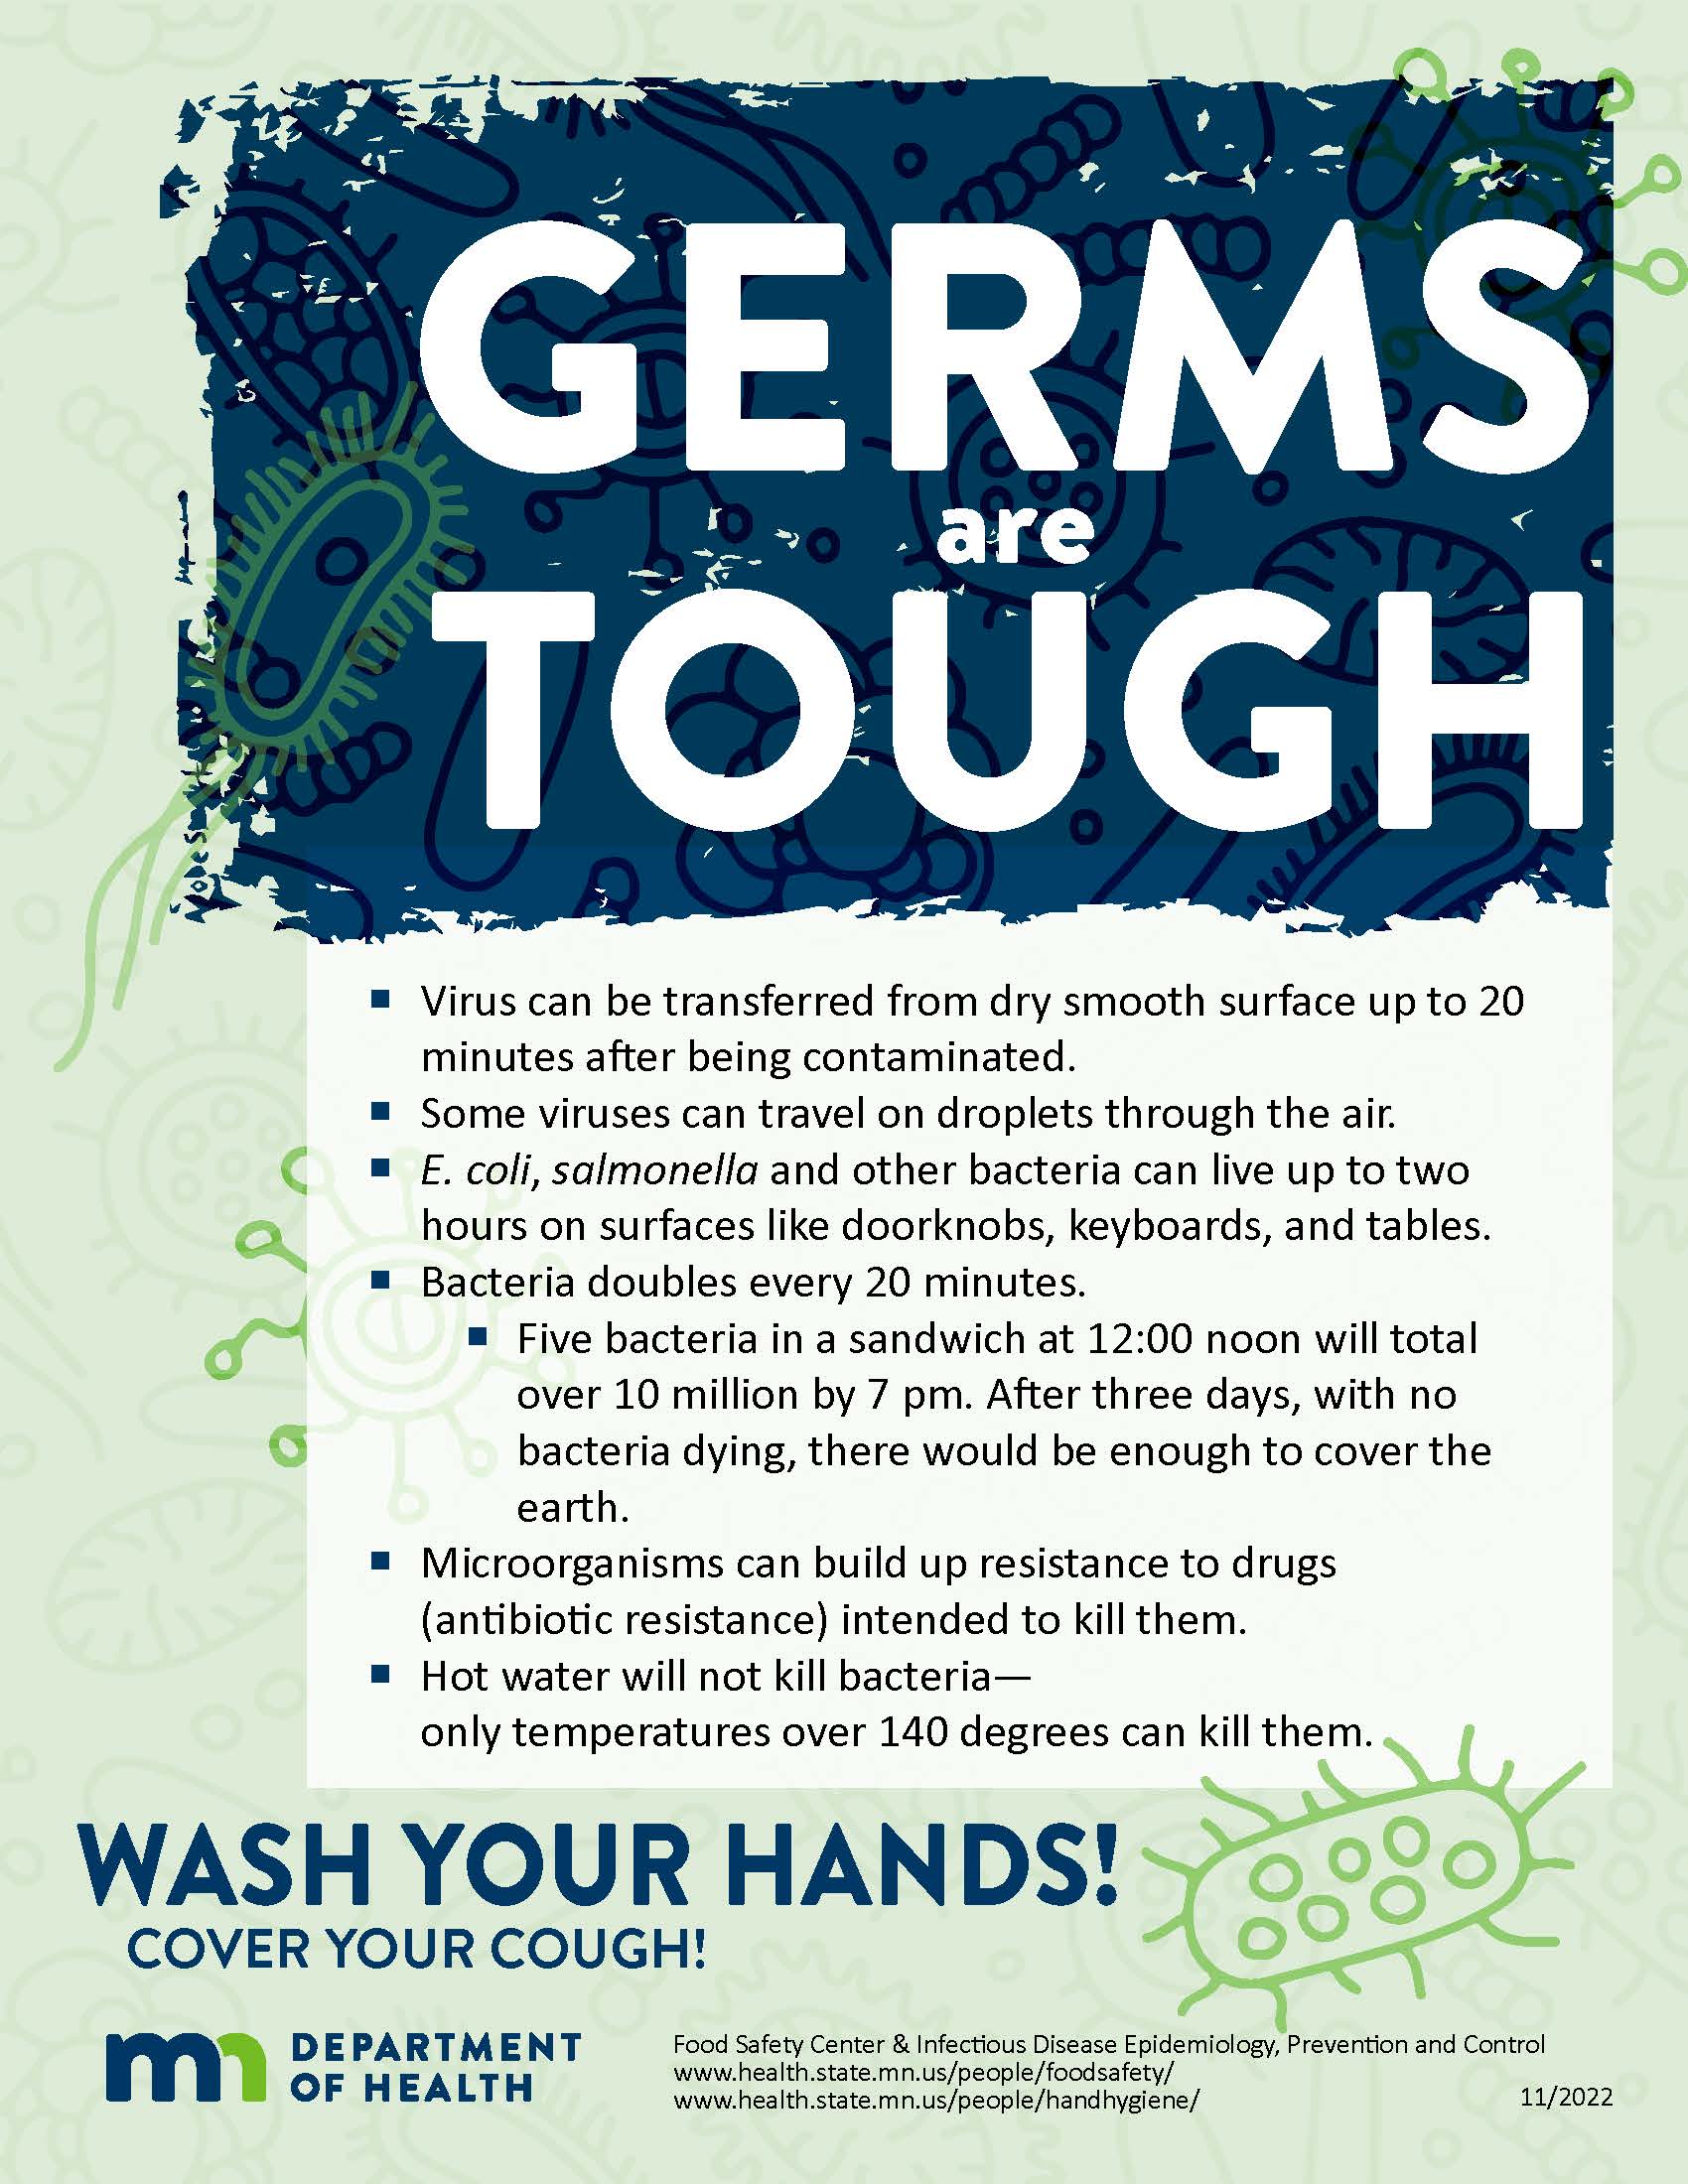 image of germs are tough poster